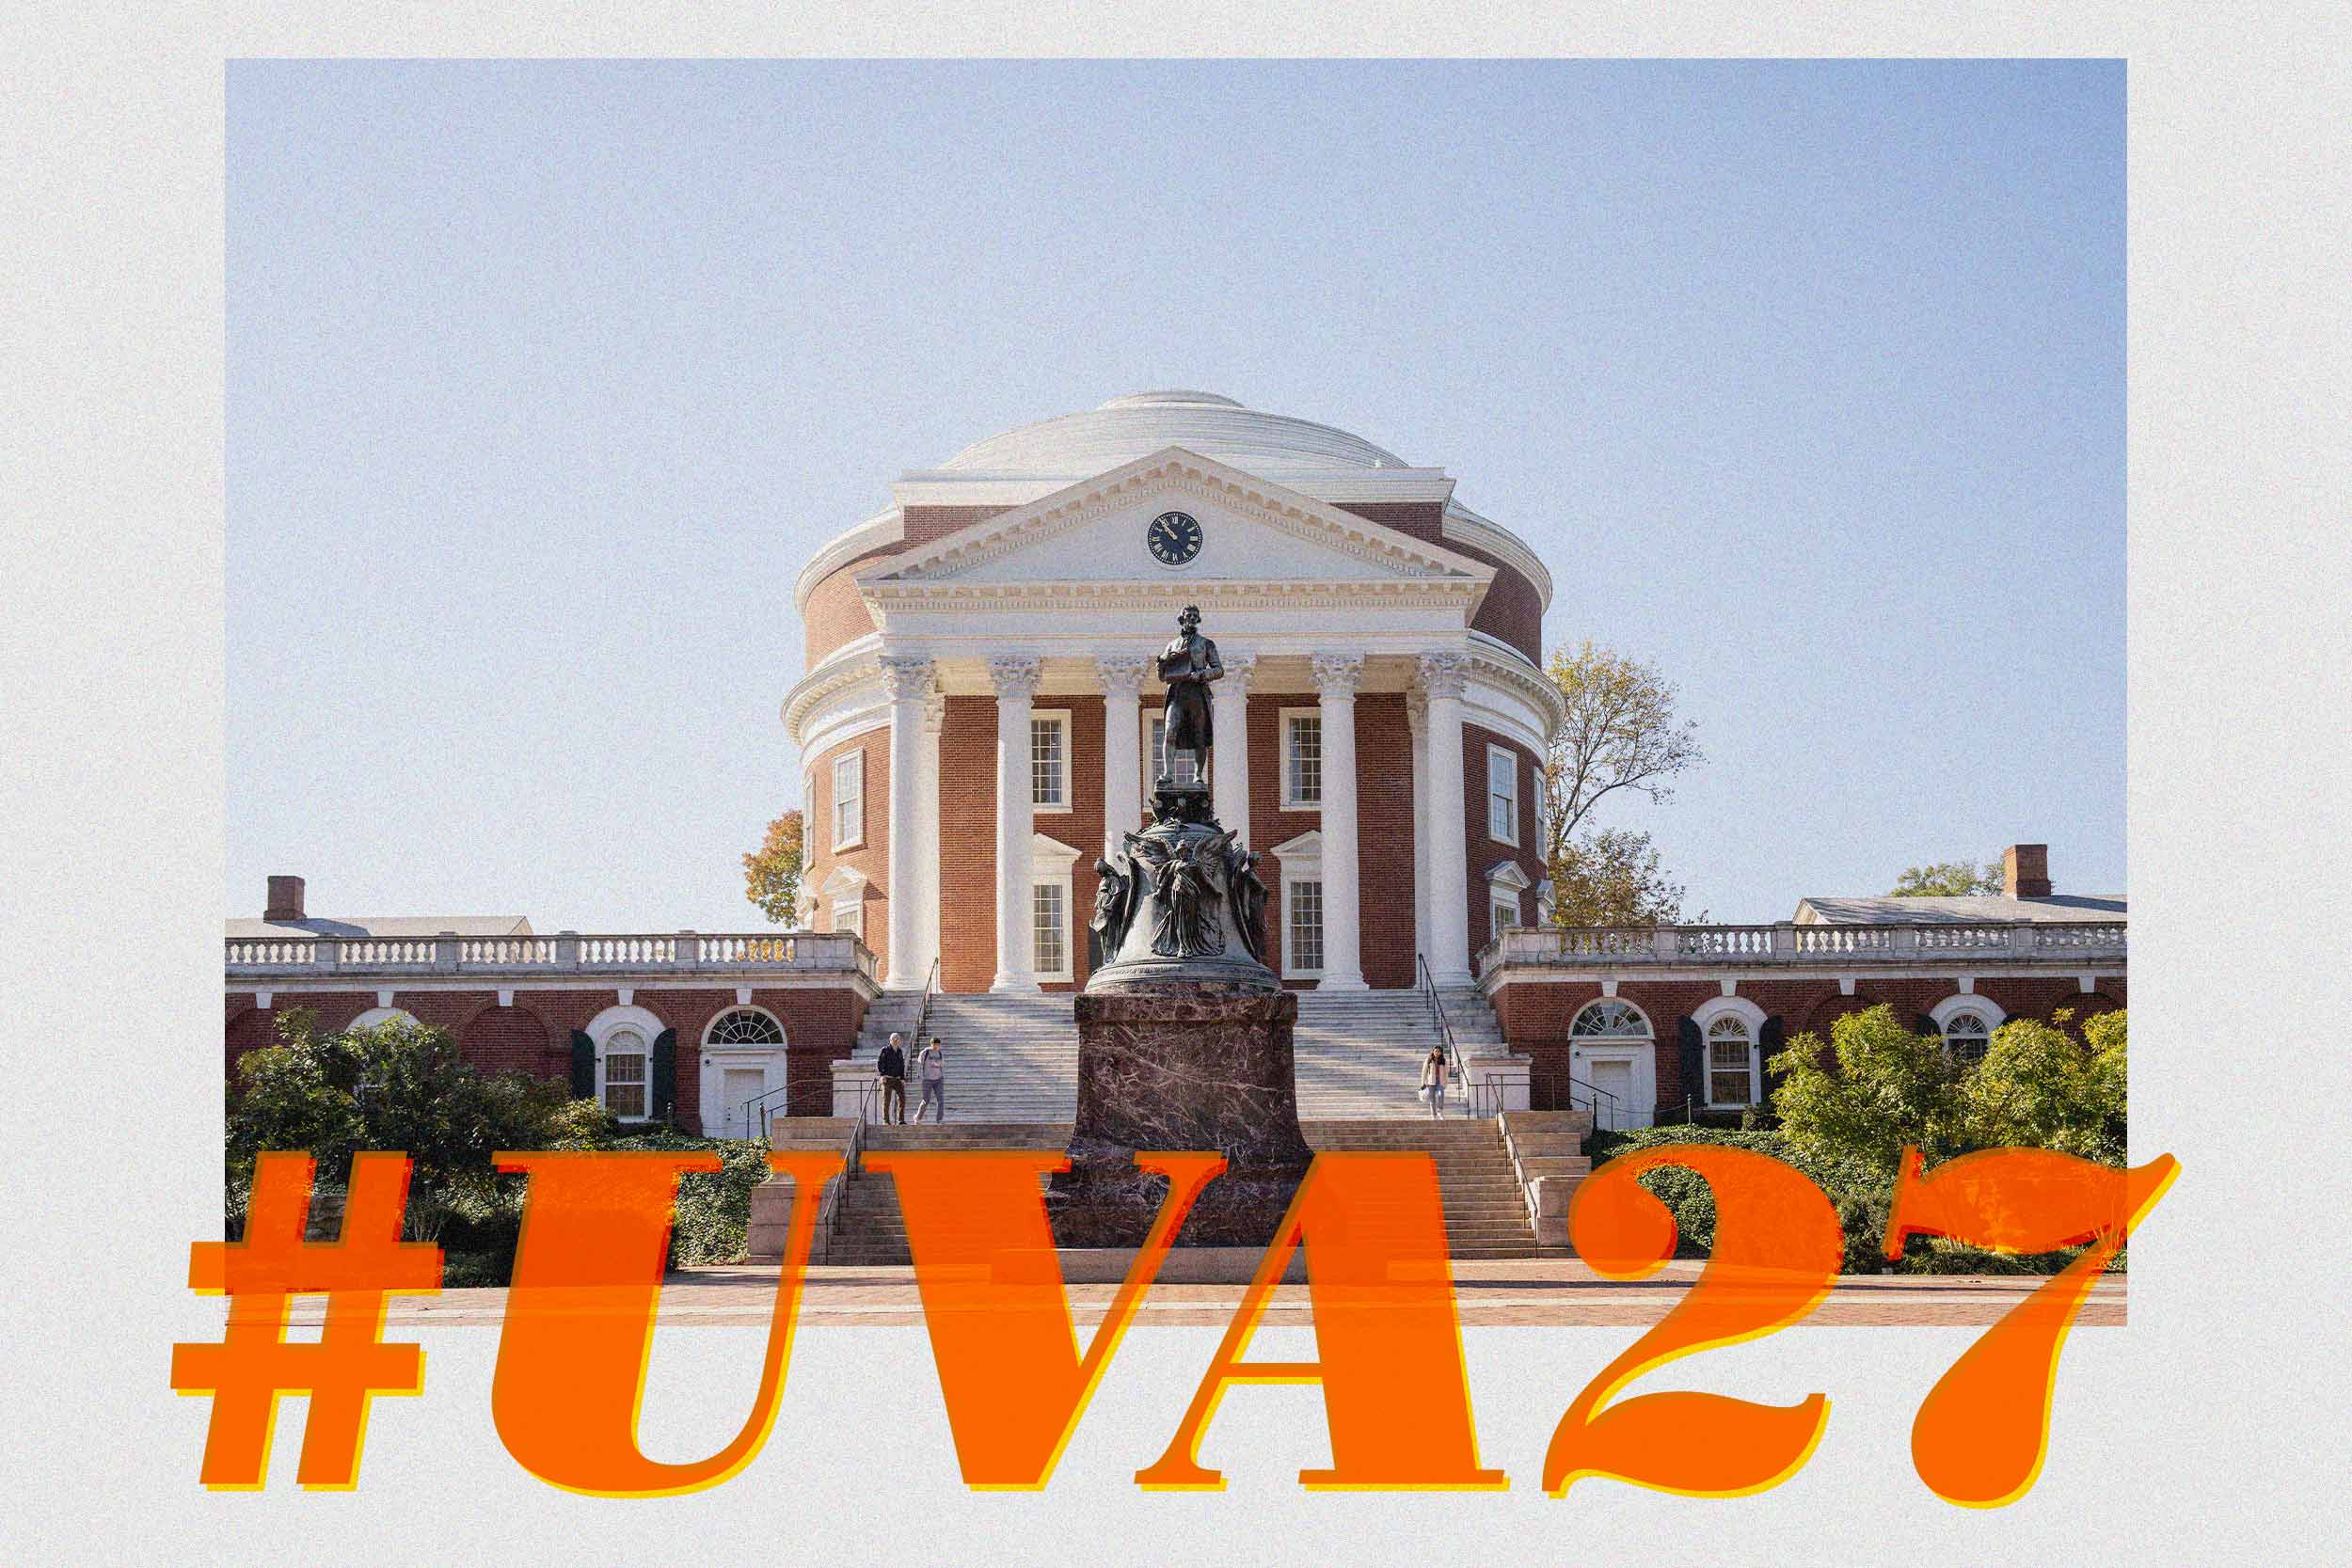 Illustration of # U V A 27 in big letters over a photo of the Rotunda